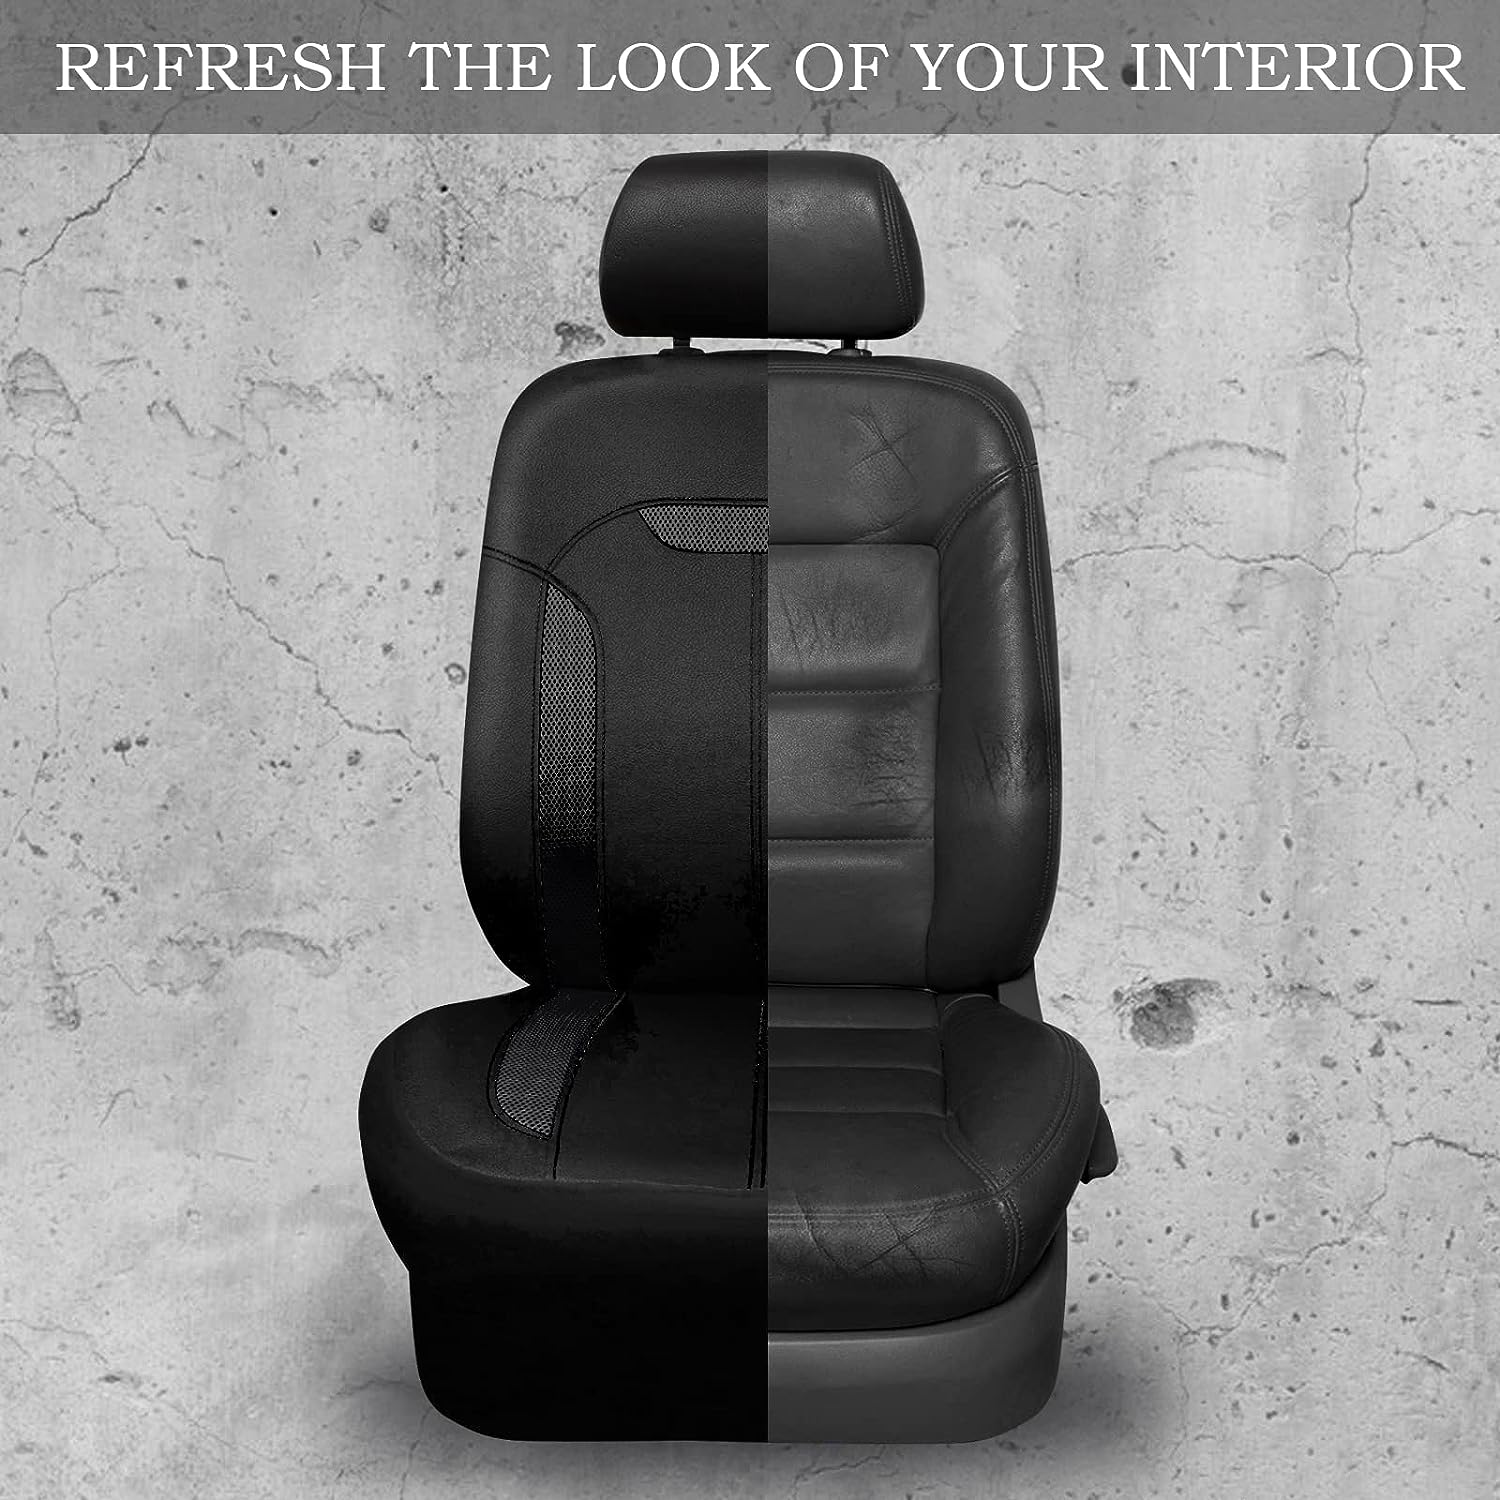 CAR PASS 3D Air Mesh in Cloth Leather Grain Breathable Car Seat Covers Full Set, Universal Compatible Fit 95% Car,SUV,Truck,Sedan,Van,Automotive, 3zipper Rear Bench Armrest Airbag Sports, Black Red